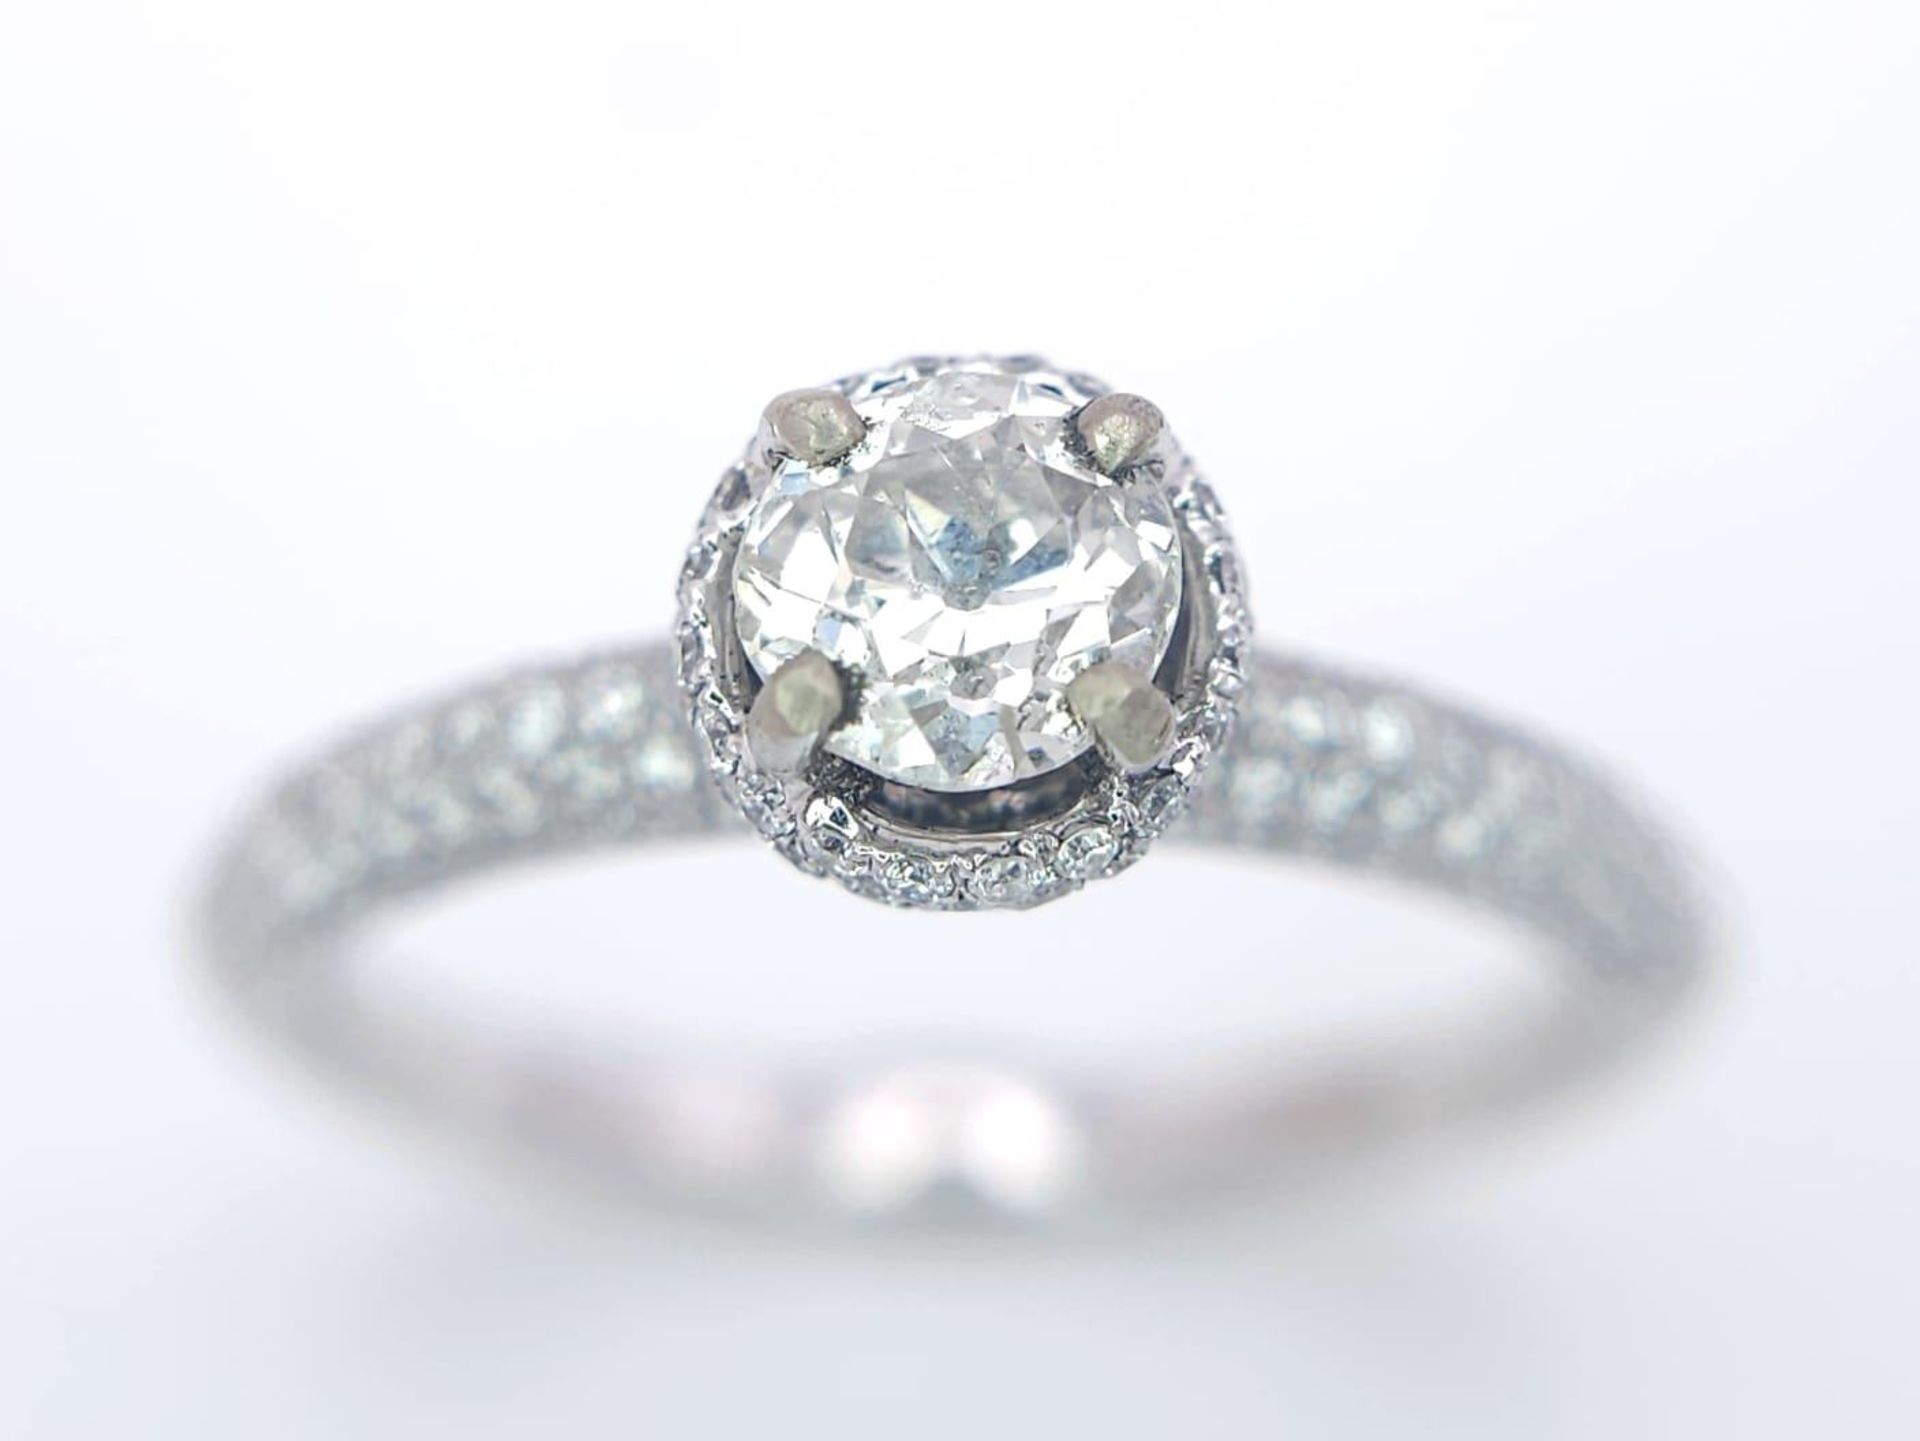 A 14K WHITE GOLD DIAMOND DIAMOND HALO RING WITH FULL SET SHOULDERS AND COLLET. 1.10CT. 2.9G. SIZE